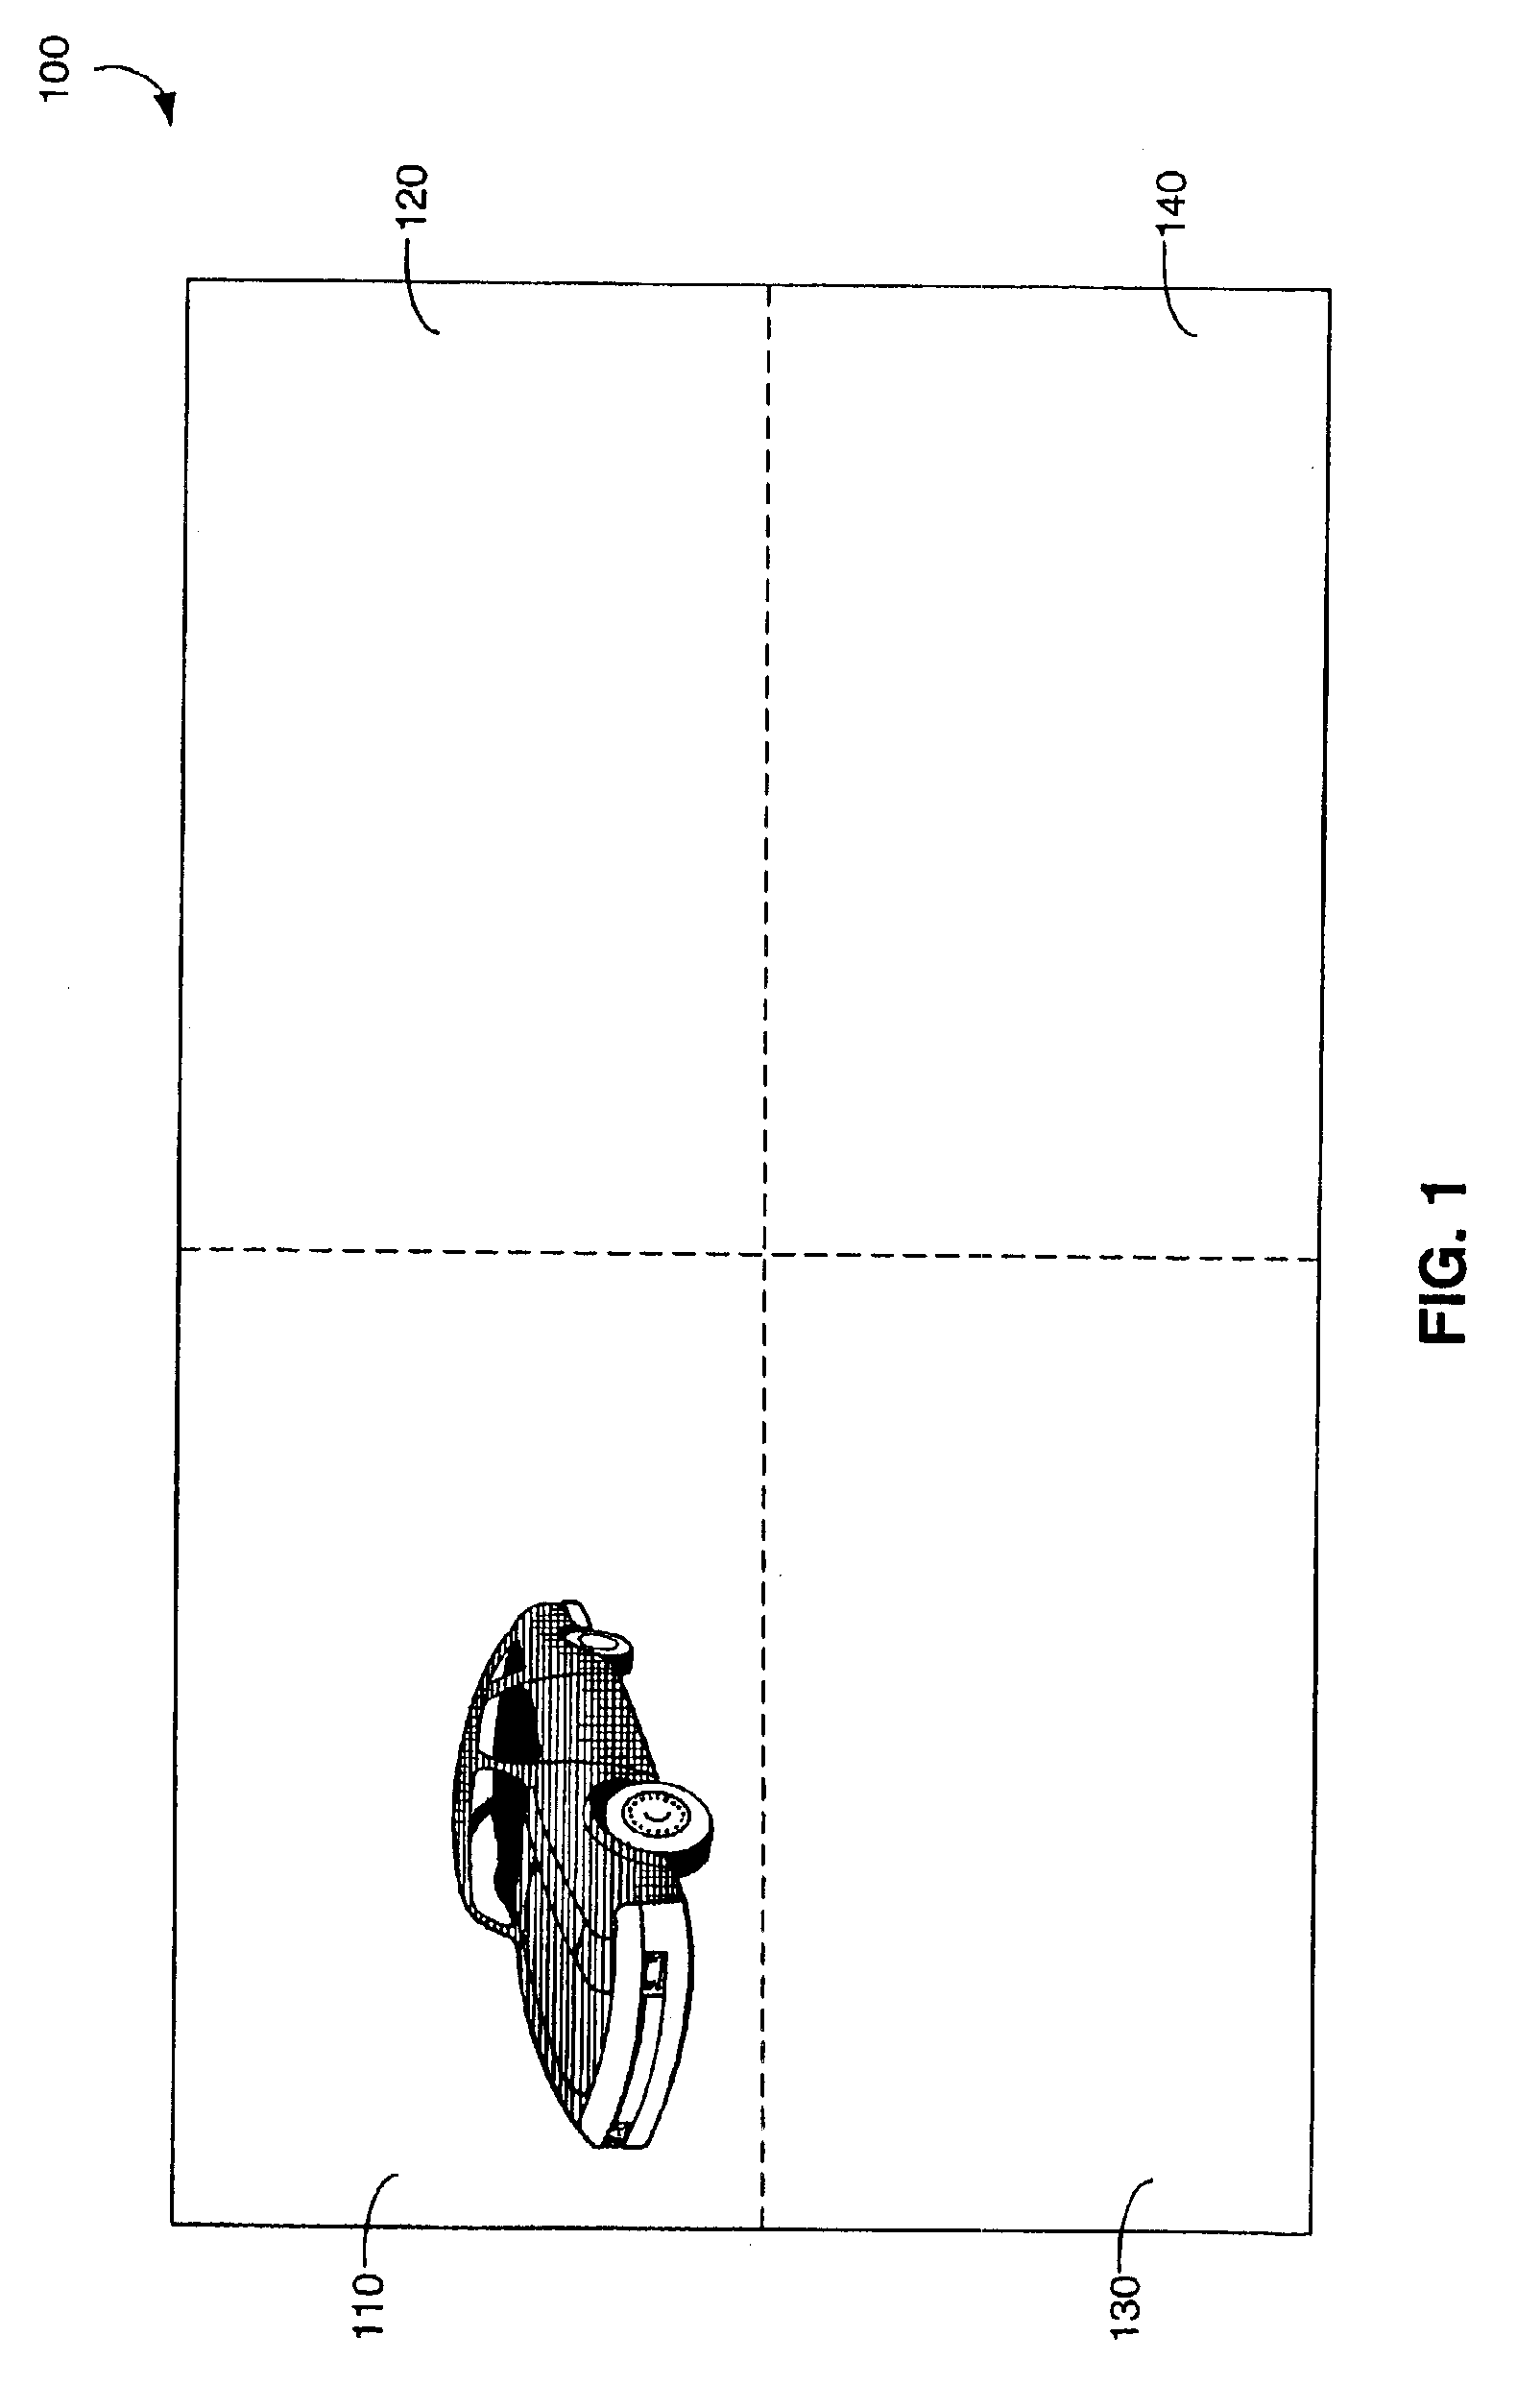 System, method, and computer program product for near-real time load balancing across multiple rendering pipelines